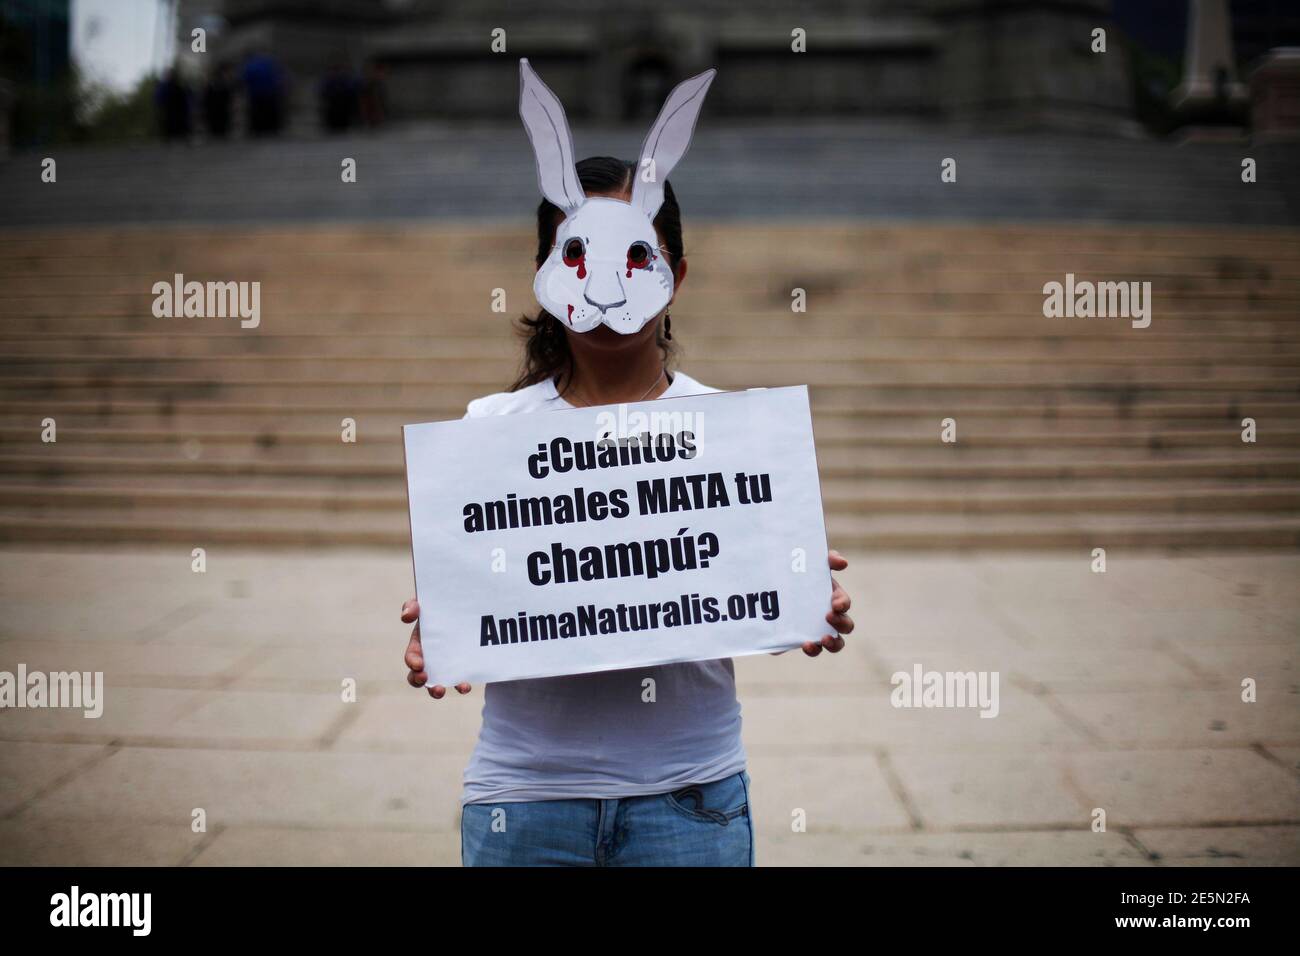 An activist from the animal rights group AnimaNaturalis wears a rabbit mask  during a protest against animal testing for cleaning products in Mexico  City May 15, 2011. REUTERS/Jorge Dan Lopez (MEXICO -